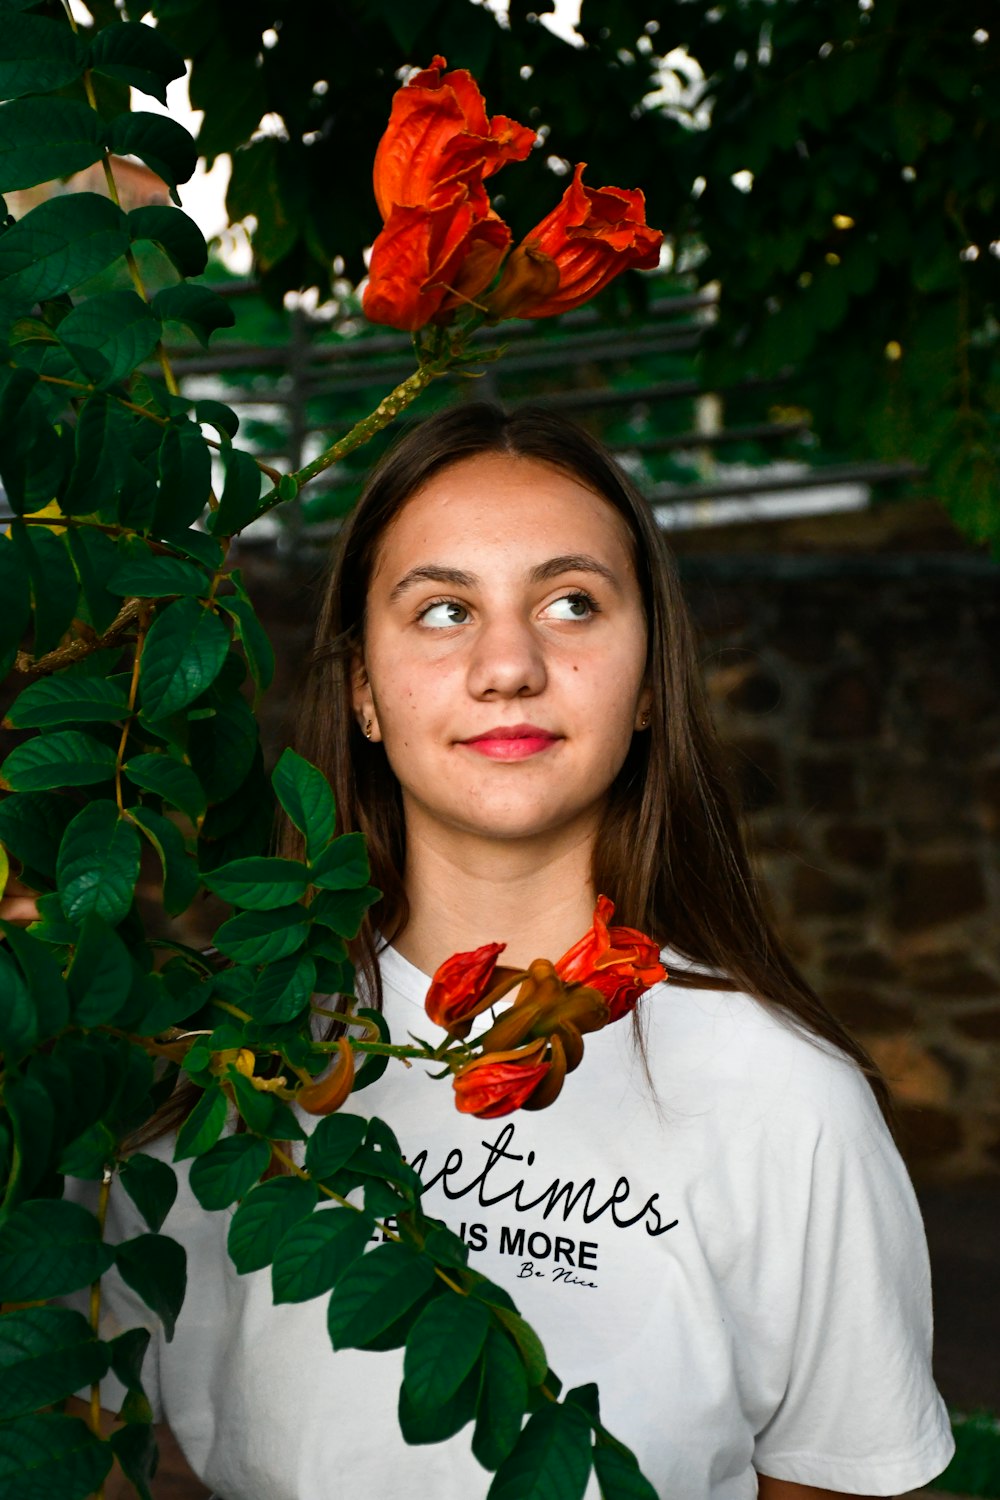 woman in white shirt standing beside red flowers